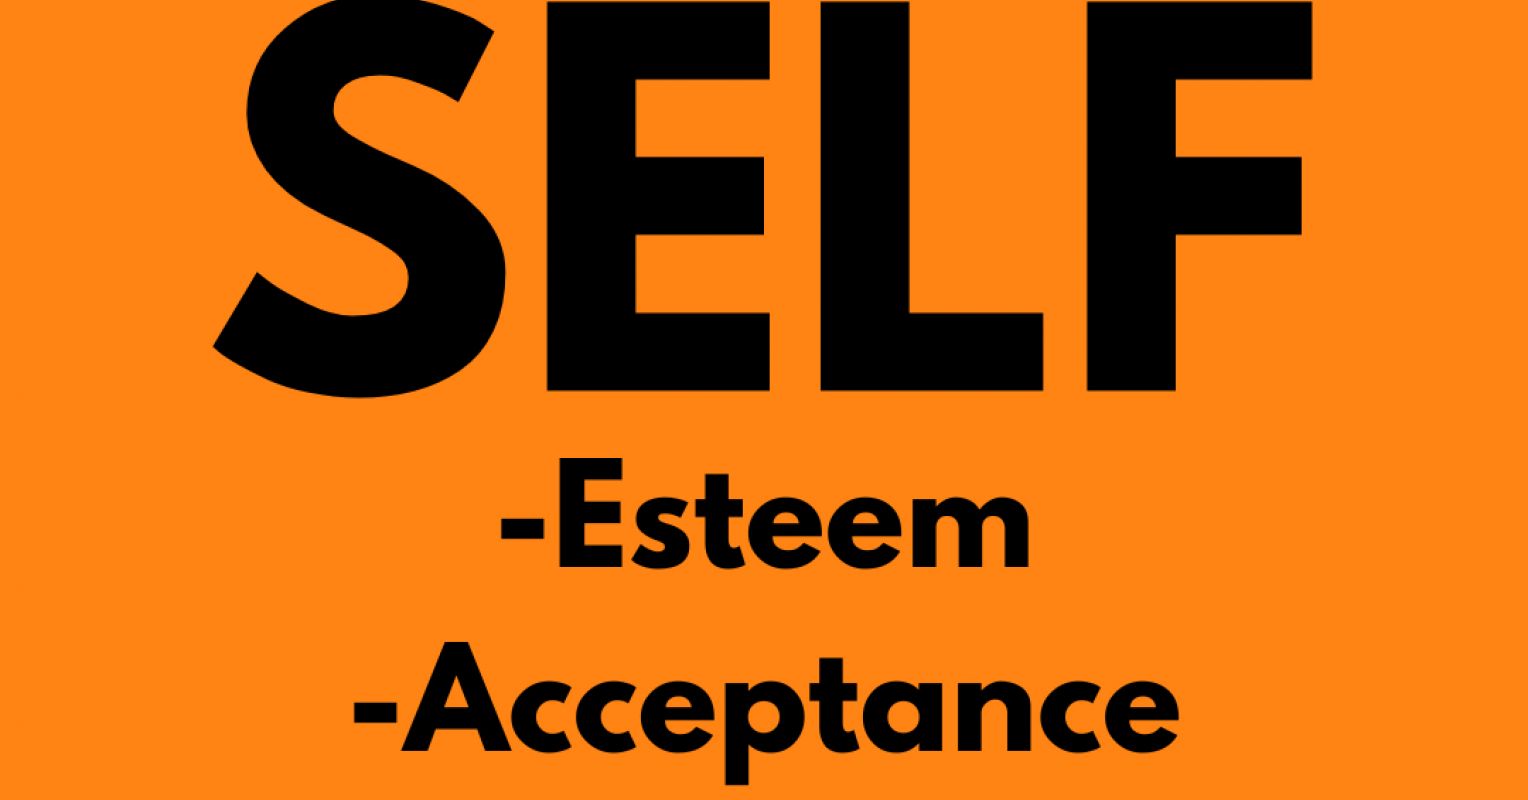 Self-Acceptance and Self-Esteem Aren't the Same Thing. What to Know - CNET